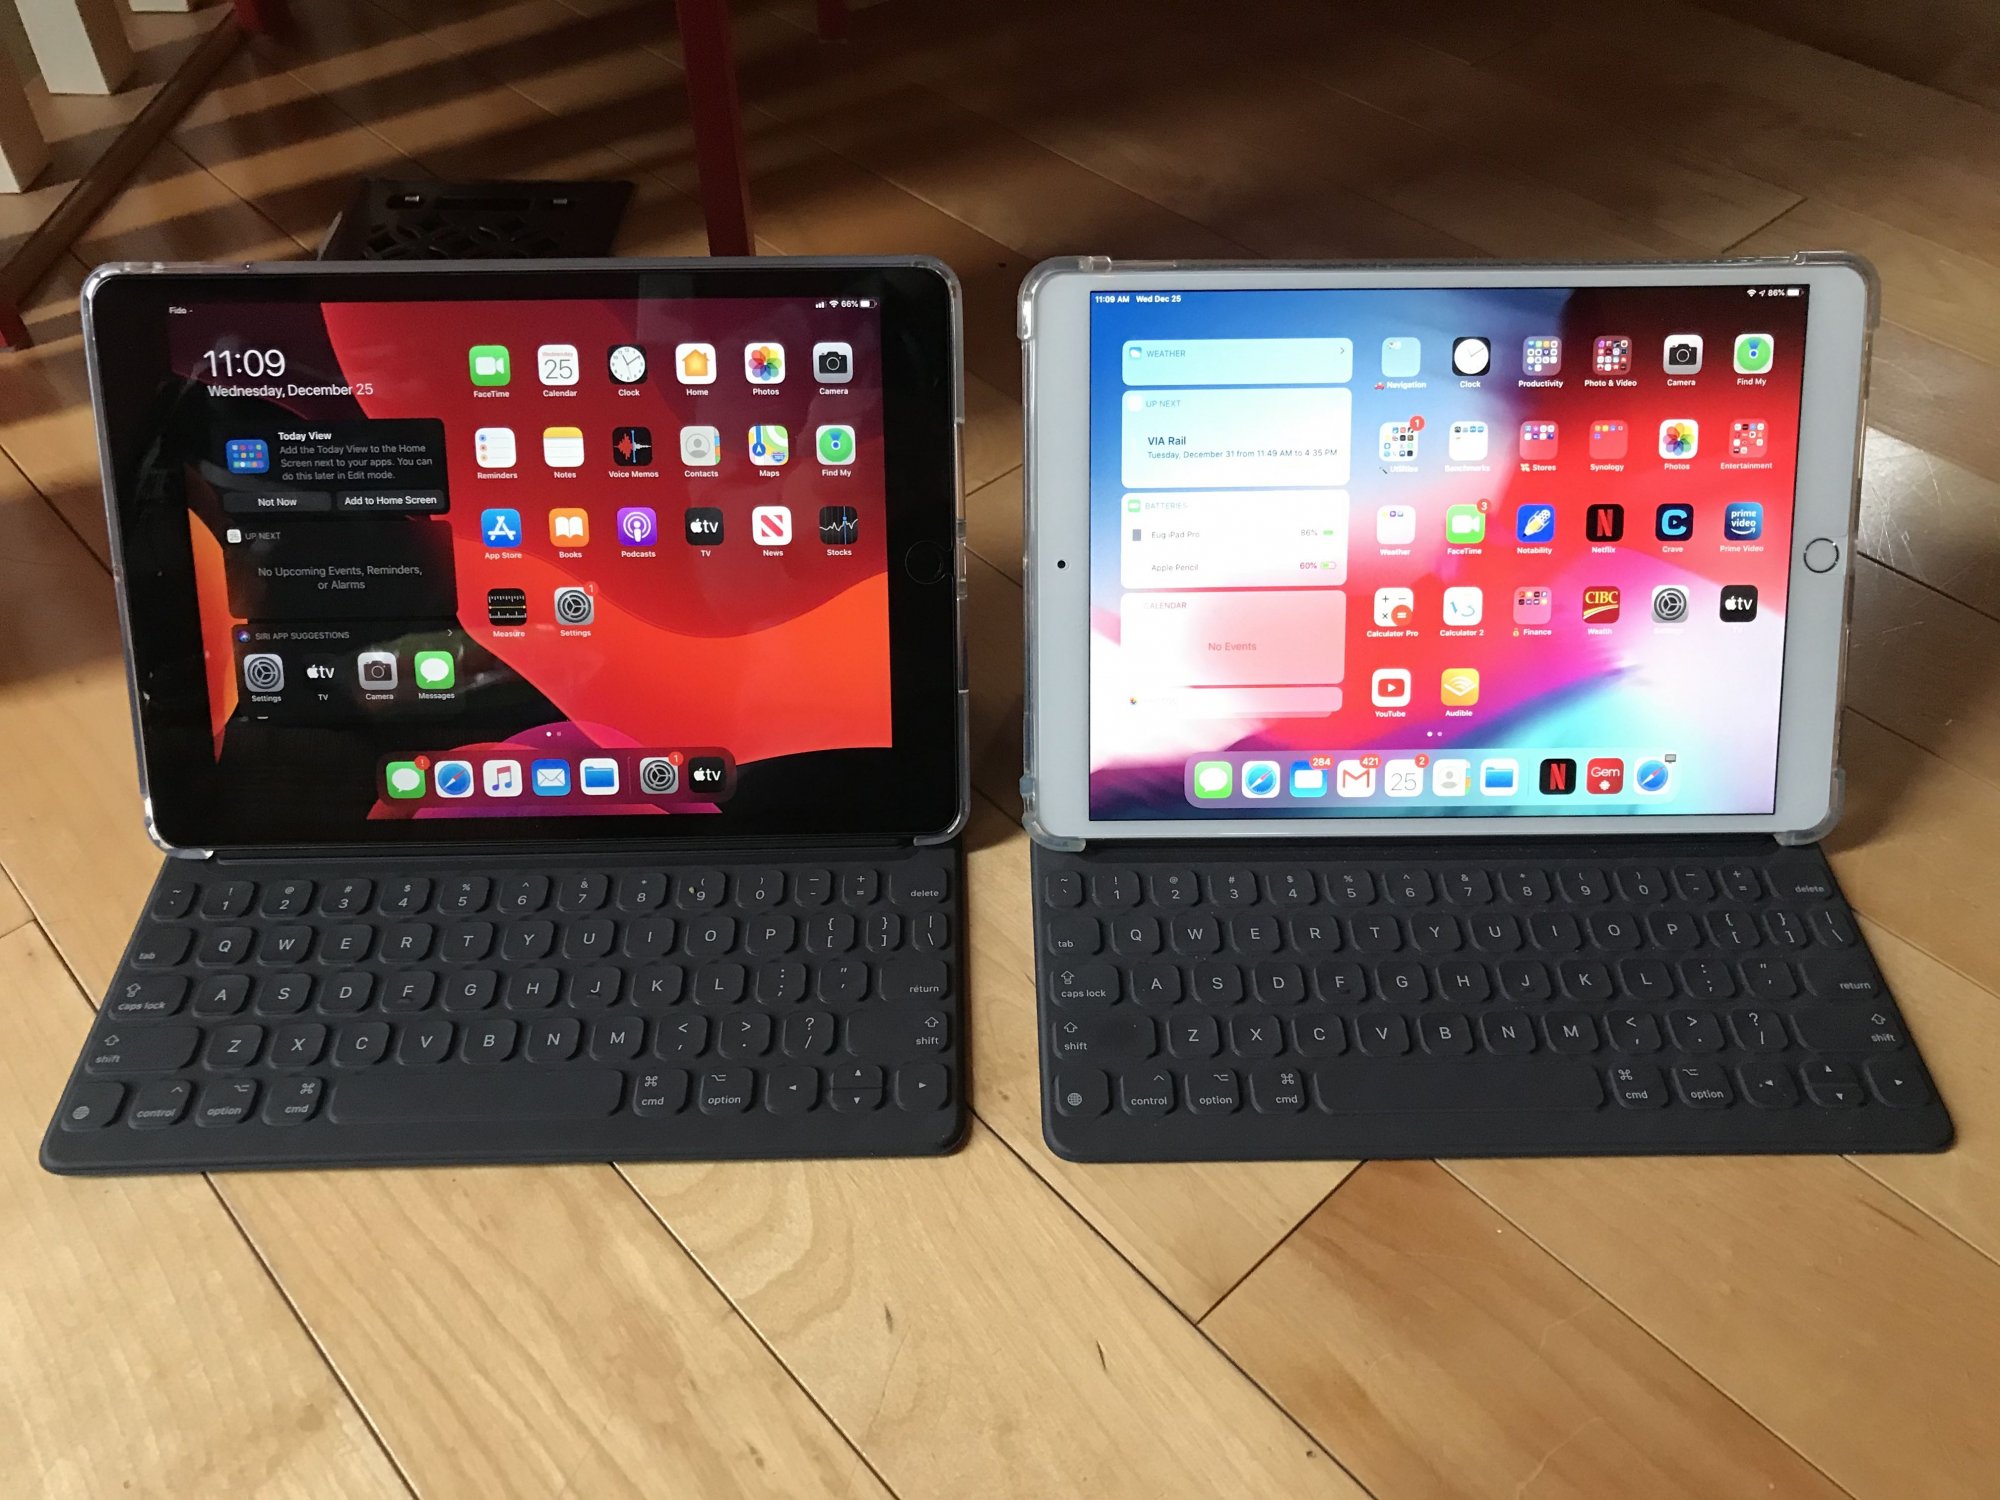 iPad 10.2" iPad Pro with Apple Smart Keyboards side by side (Pic!) | Forums